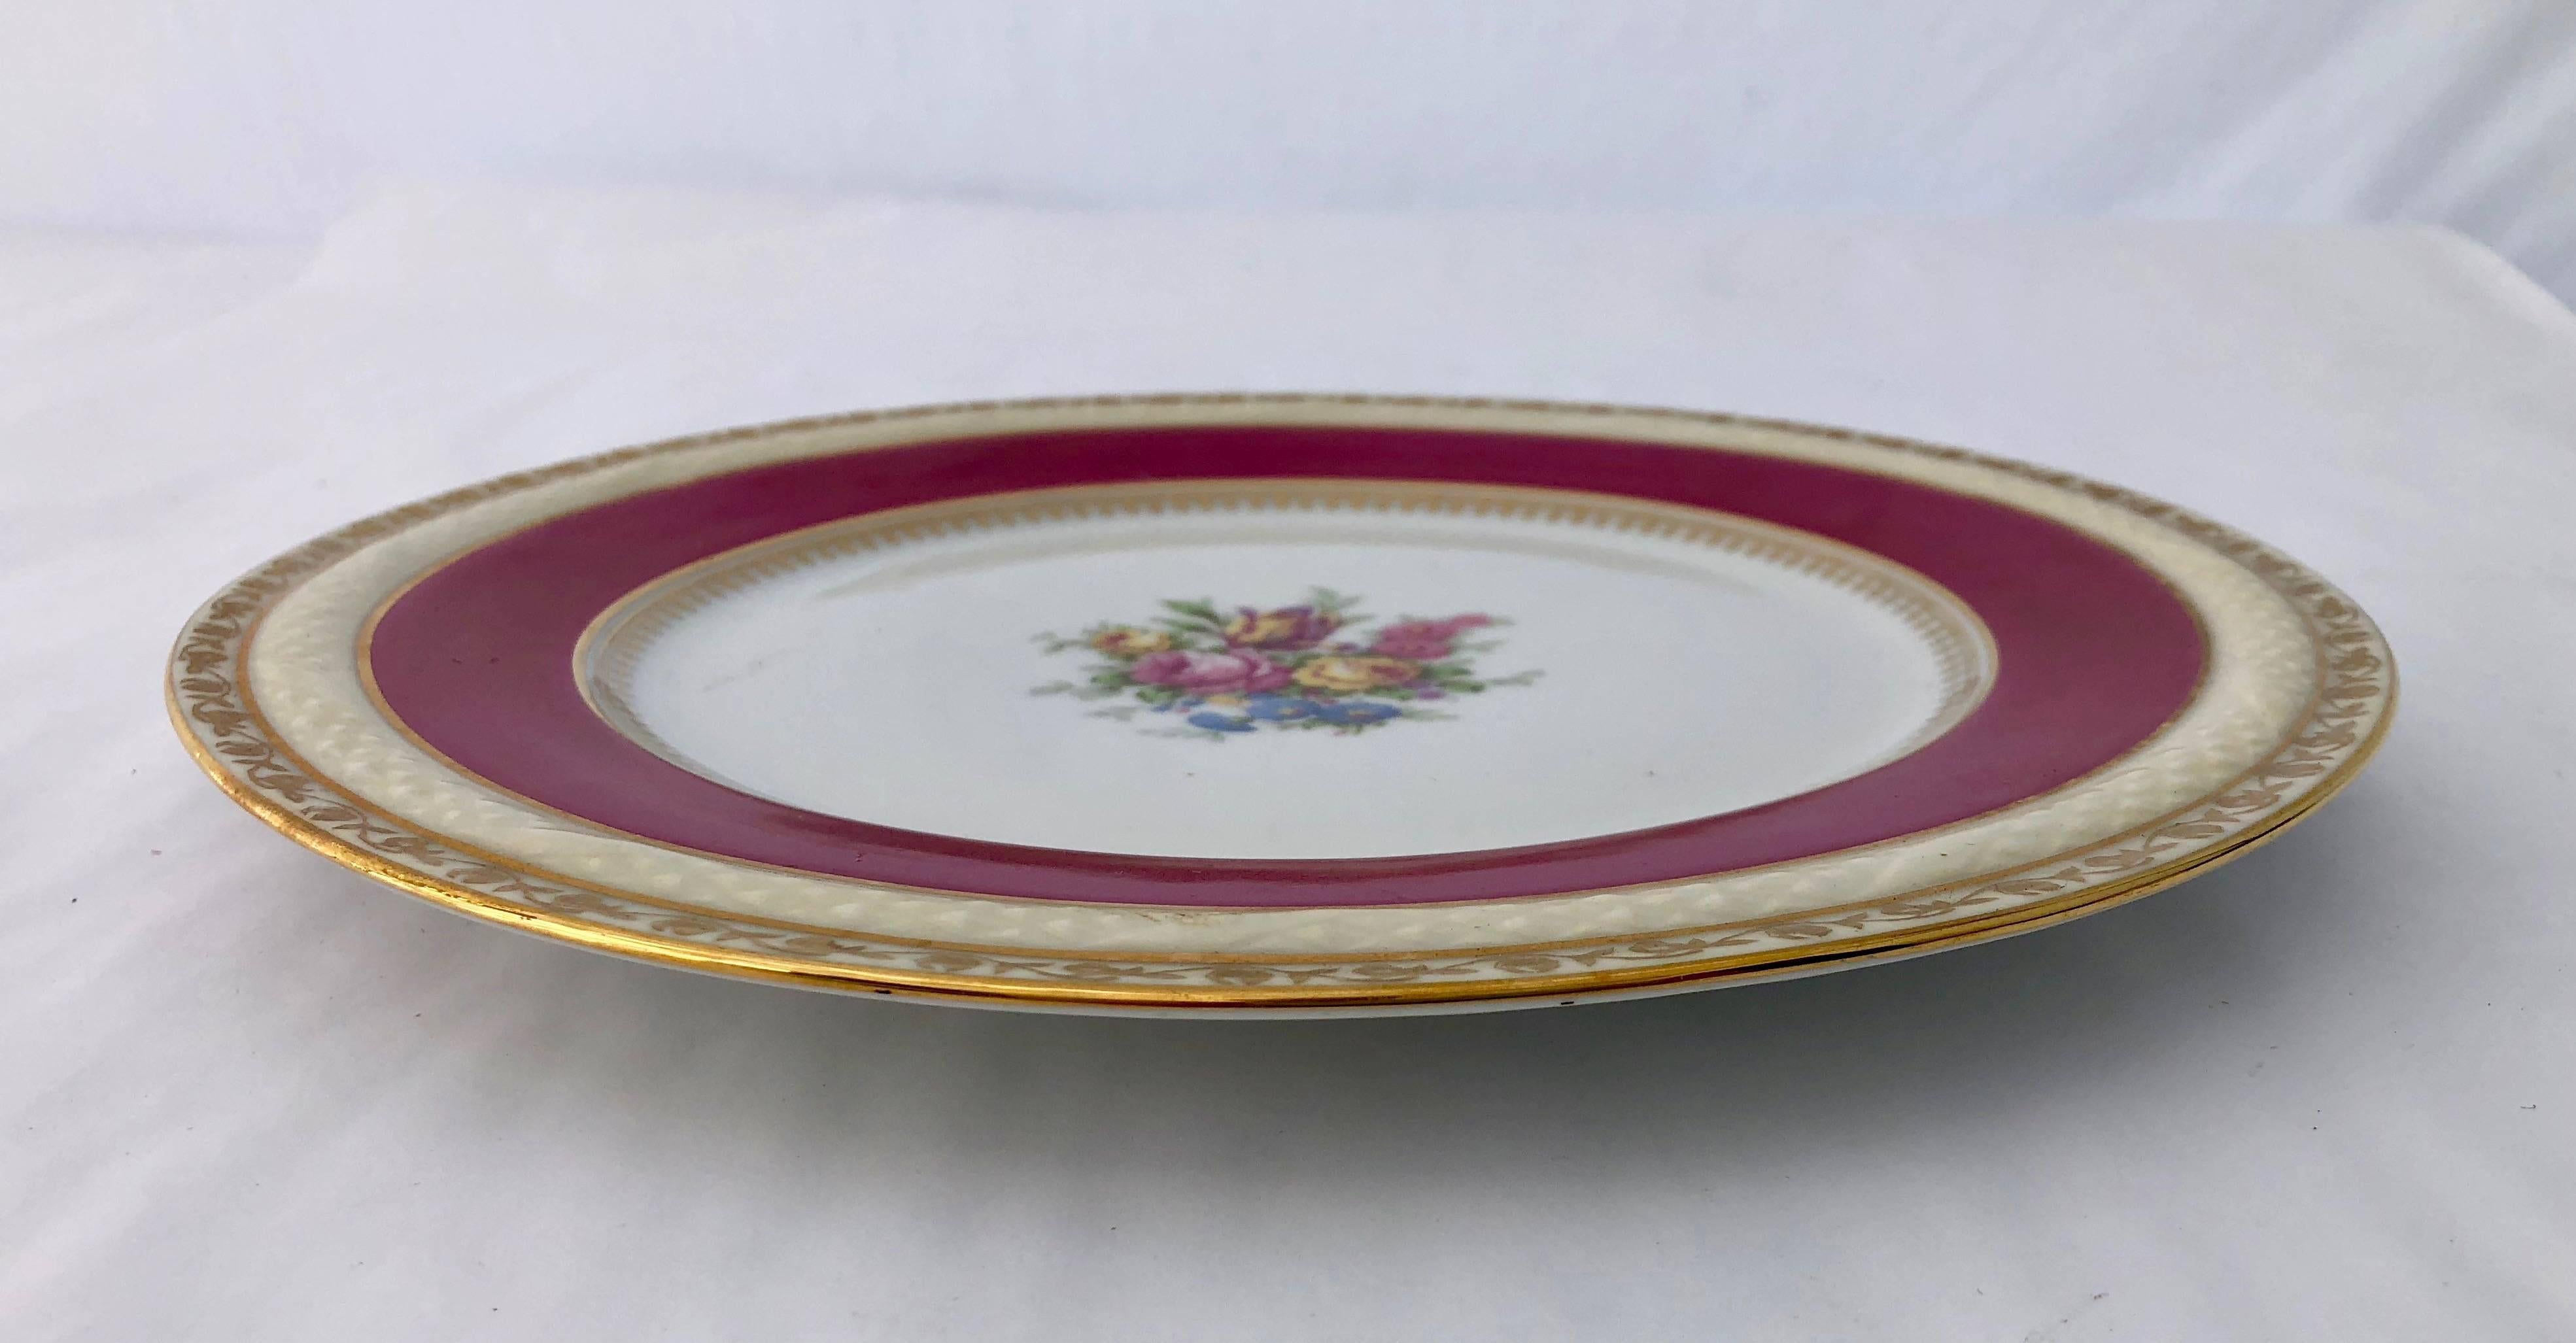 2 French Limoges Serving Plates, Hand-Painted Red, Gold with Decorative Flowers For Sale 1